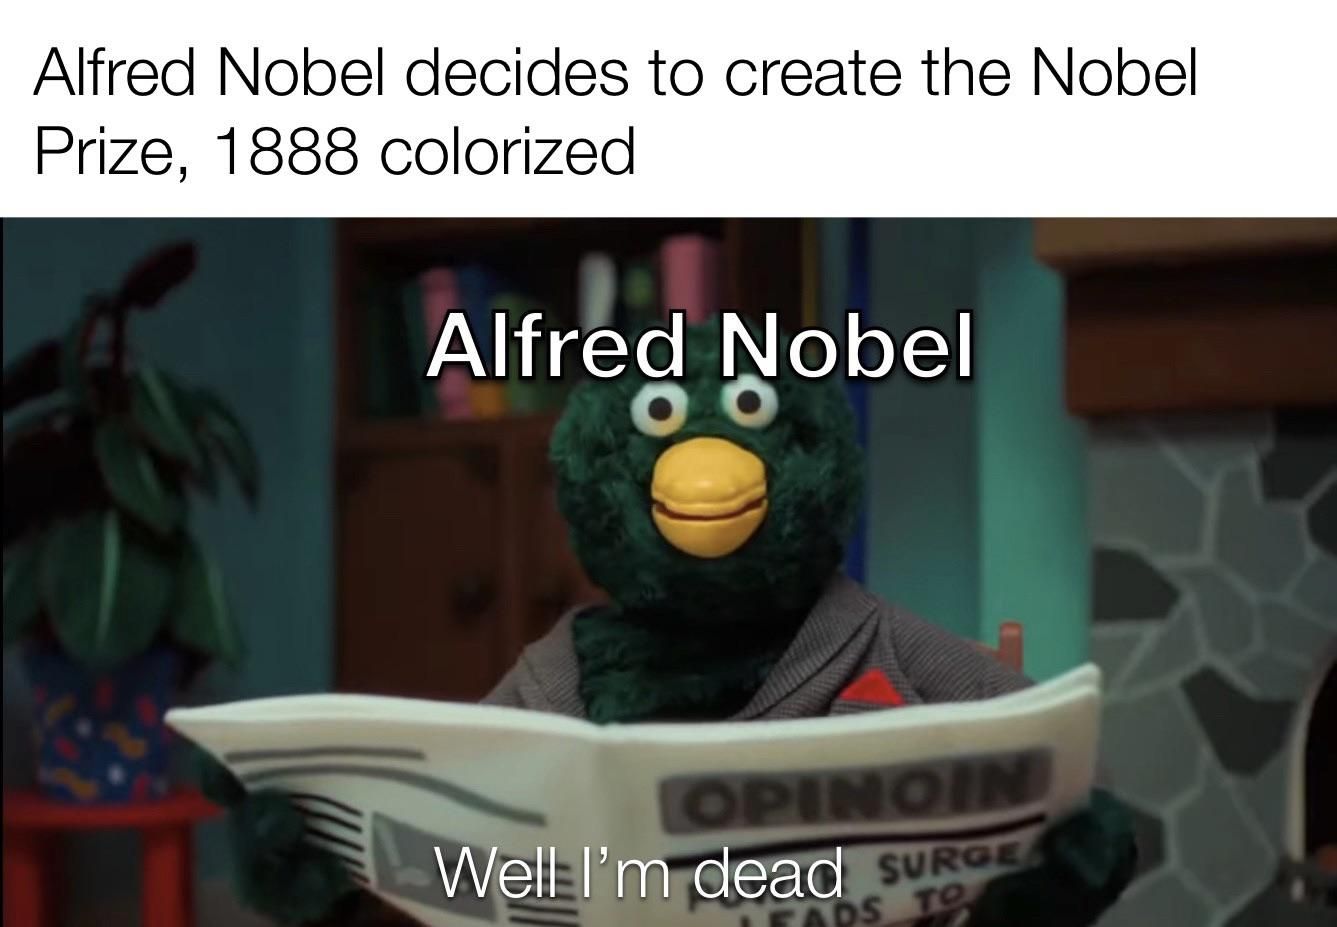 Nobel’s brother died in 1888 and newspapers, mistakenly believing Alfred had died, published his obituaries which were very negative and made him rethink his life